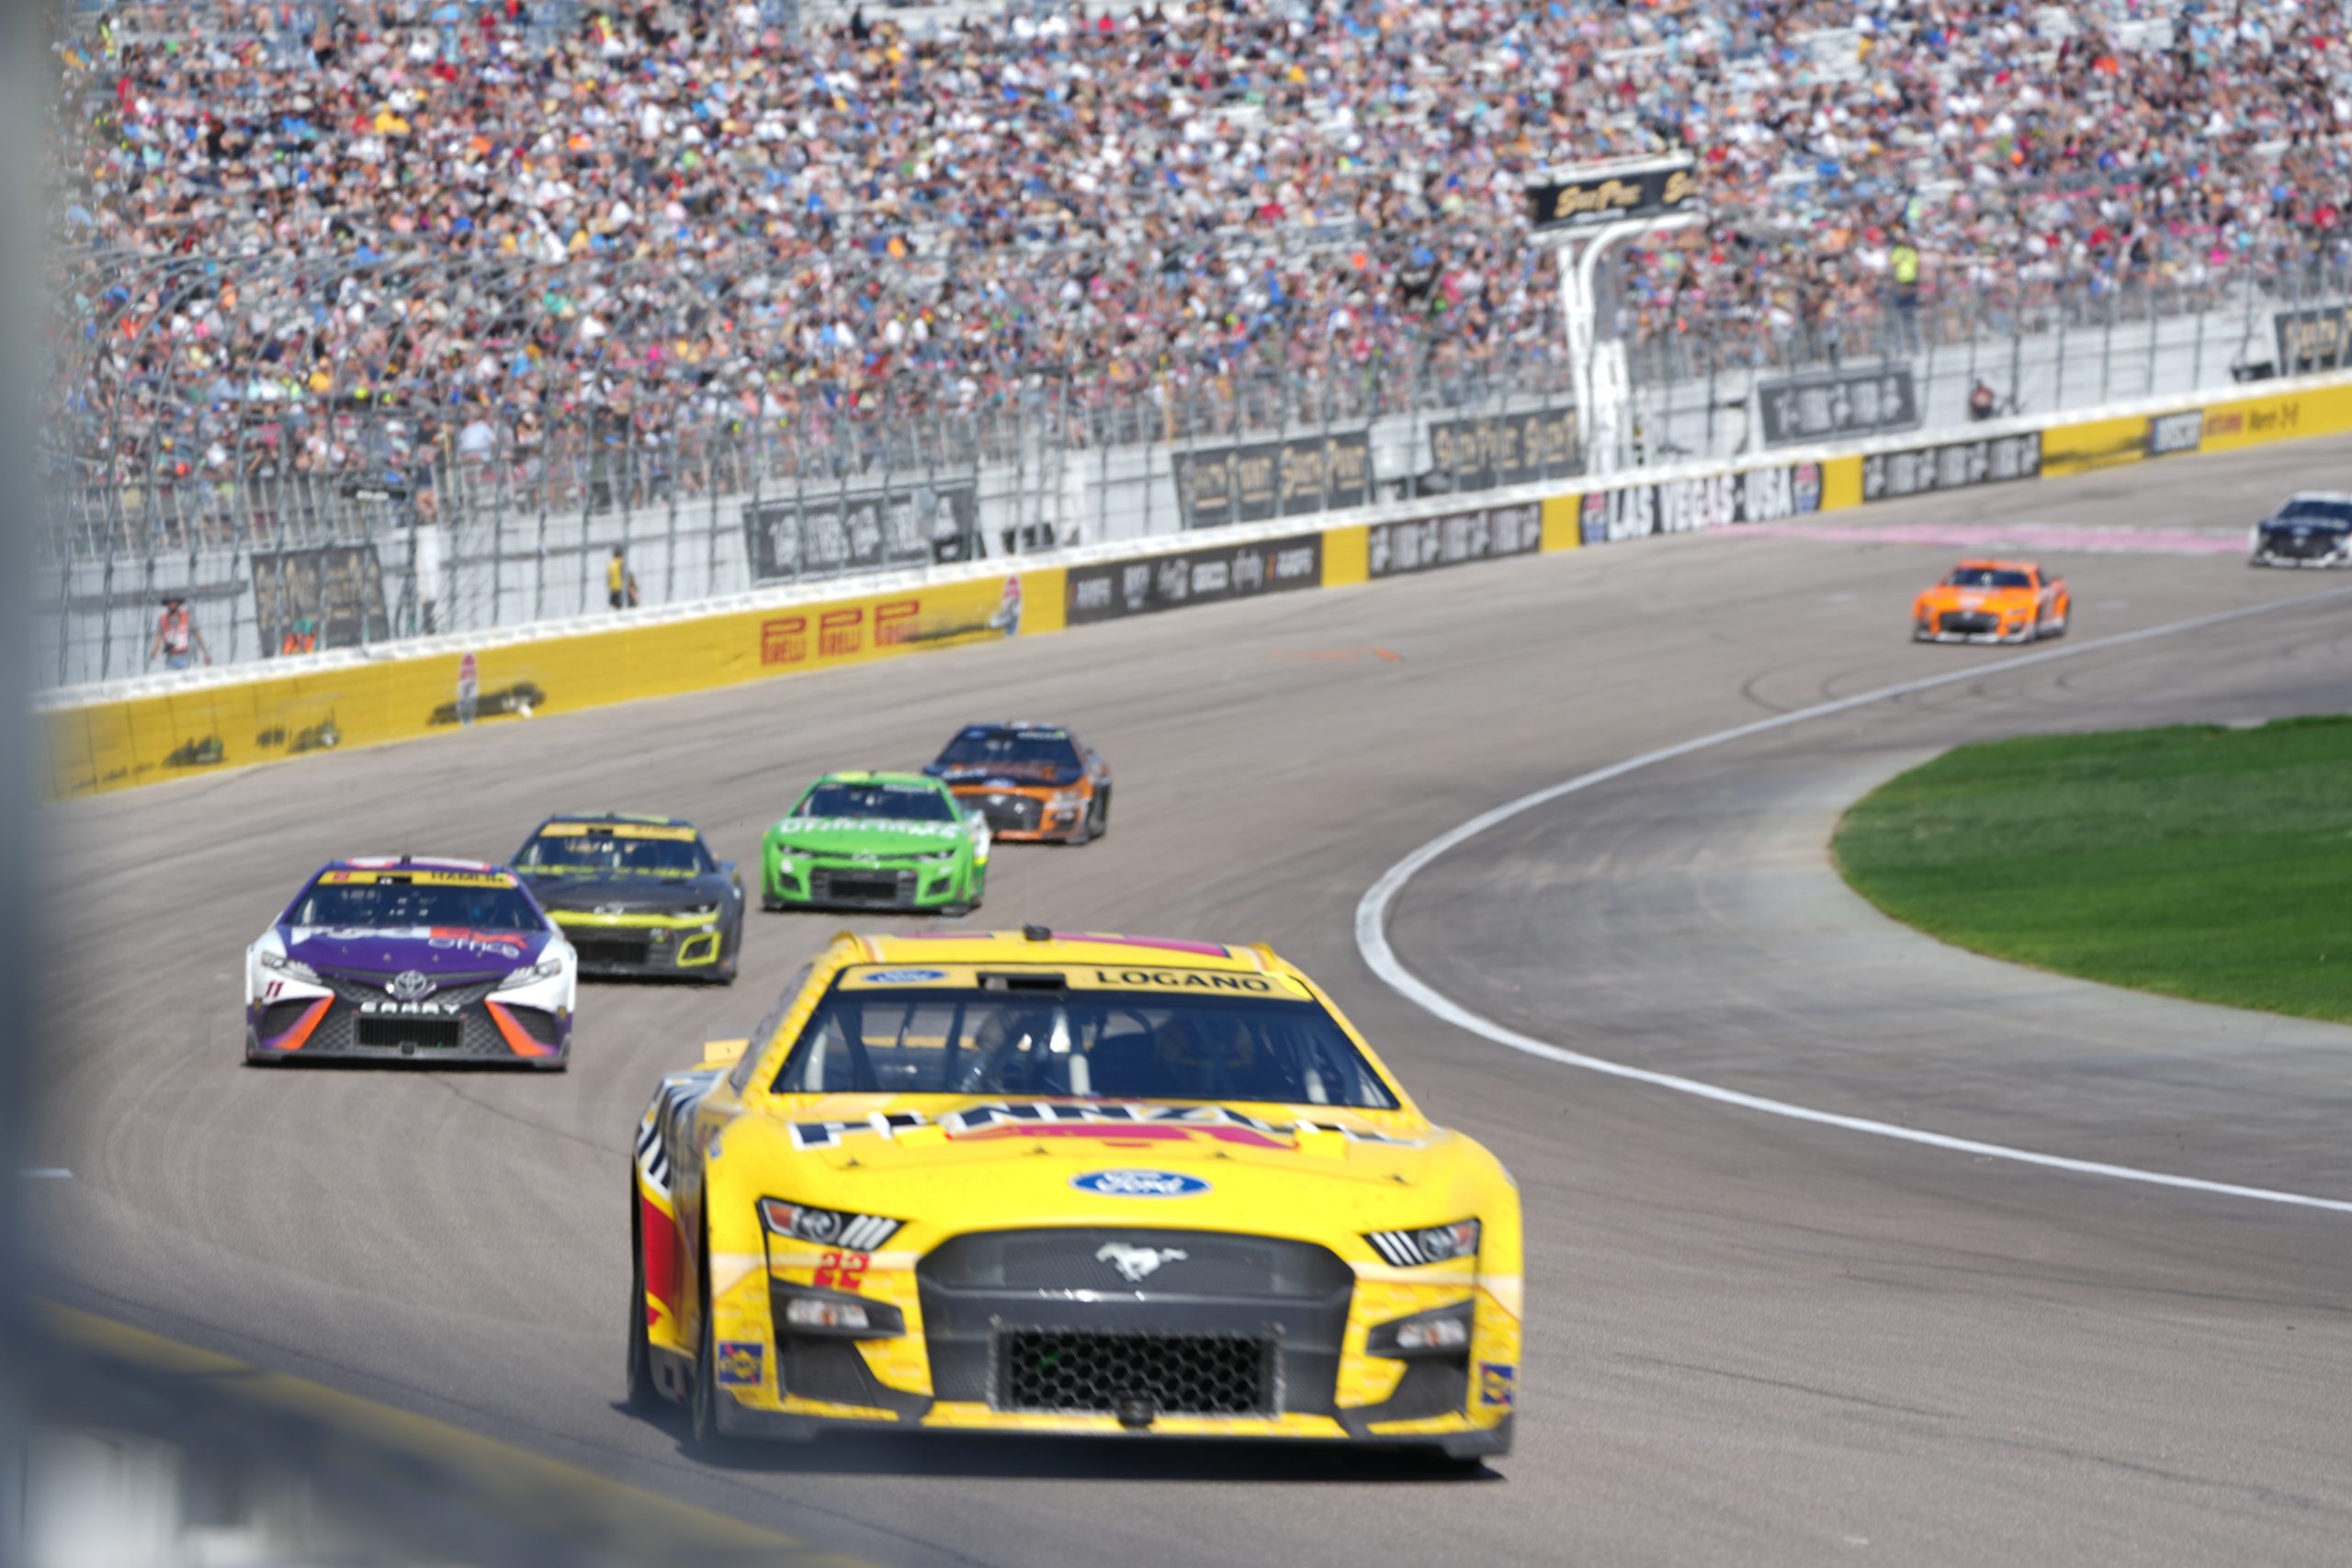 Early on, Logano scored some "life insurance" or stage points. (Photo: Christopher Vargas | The Podium Finish)